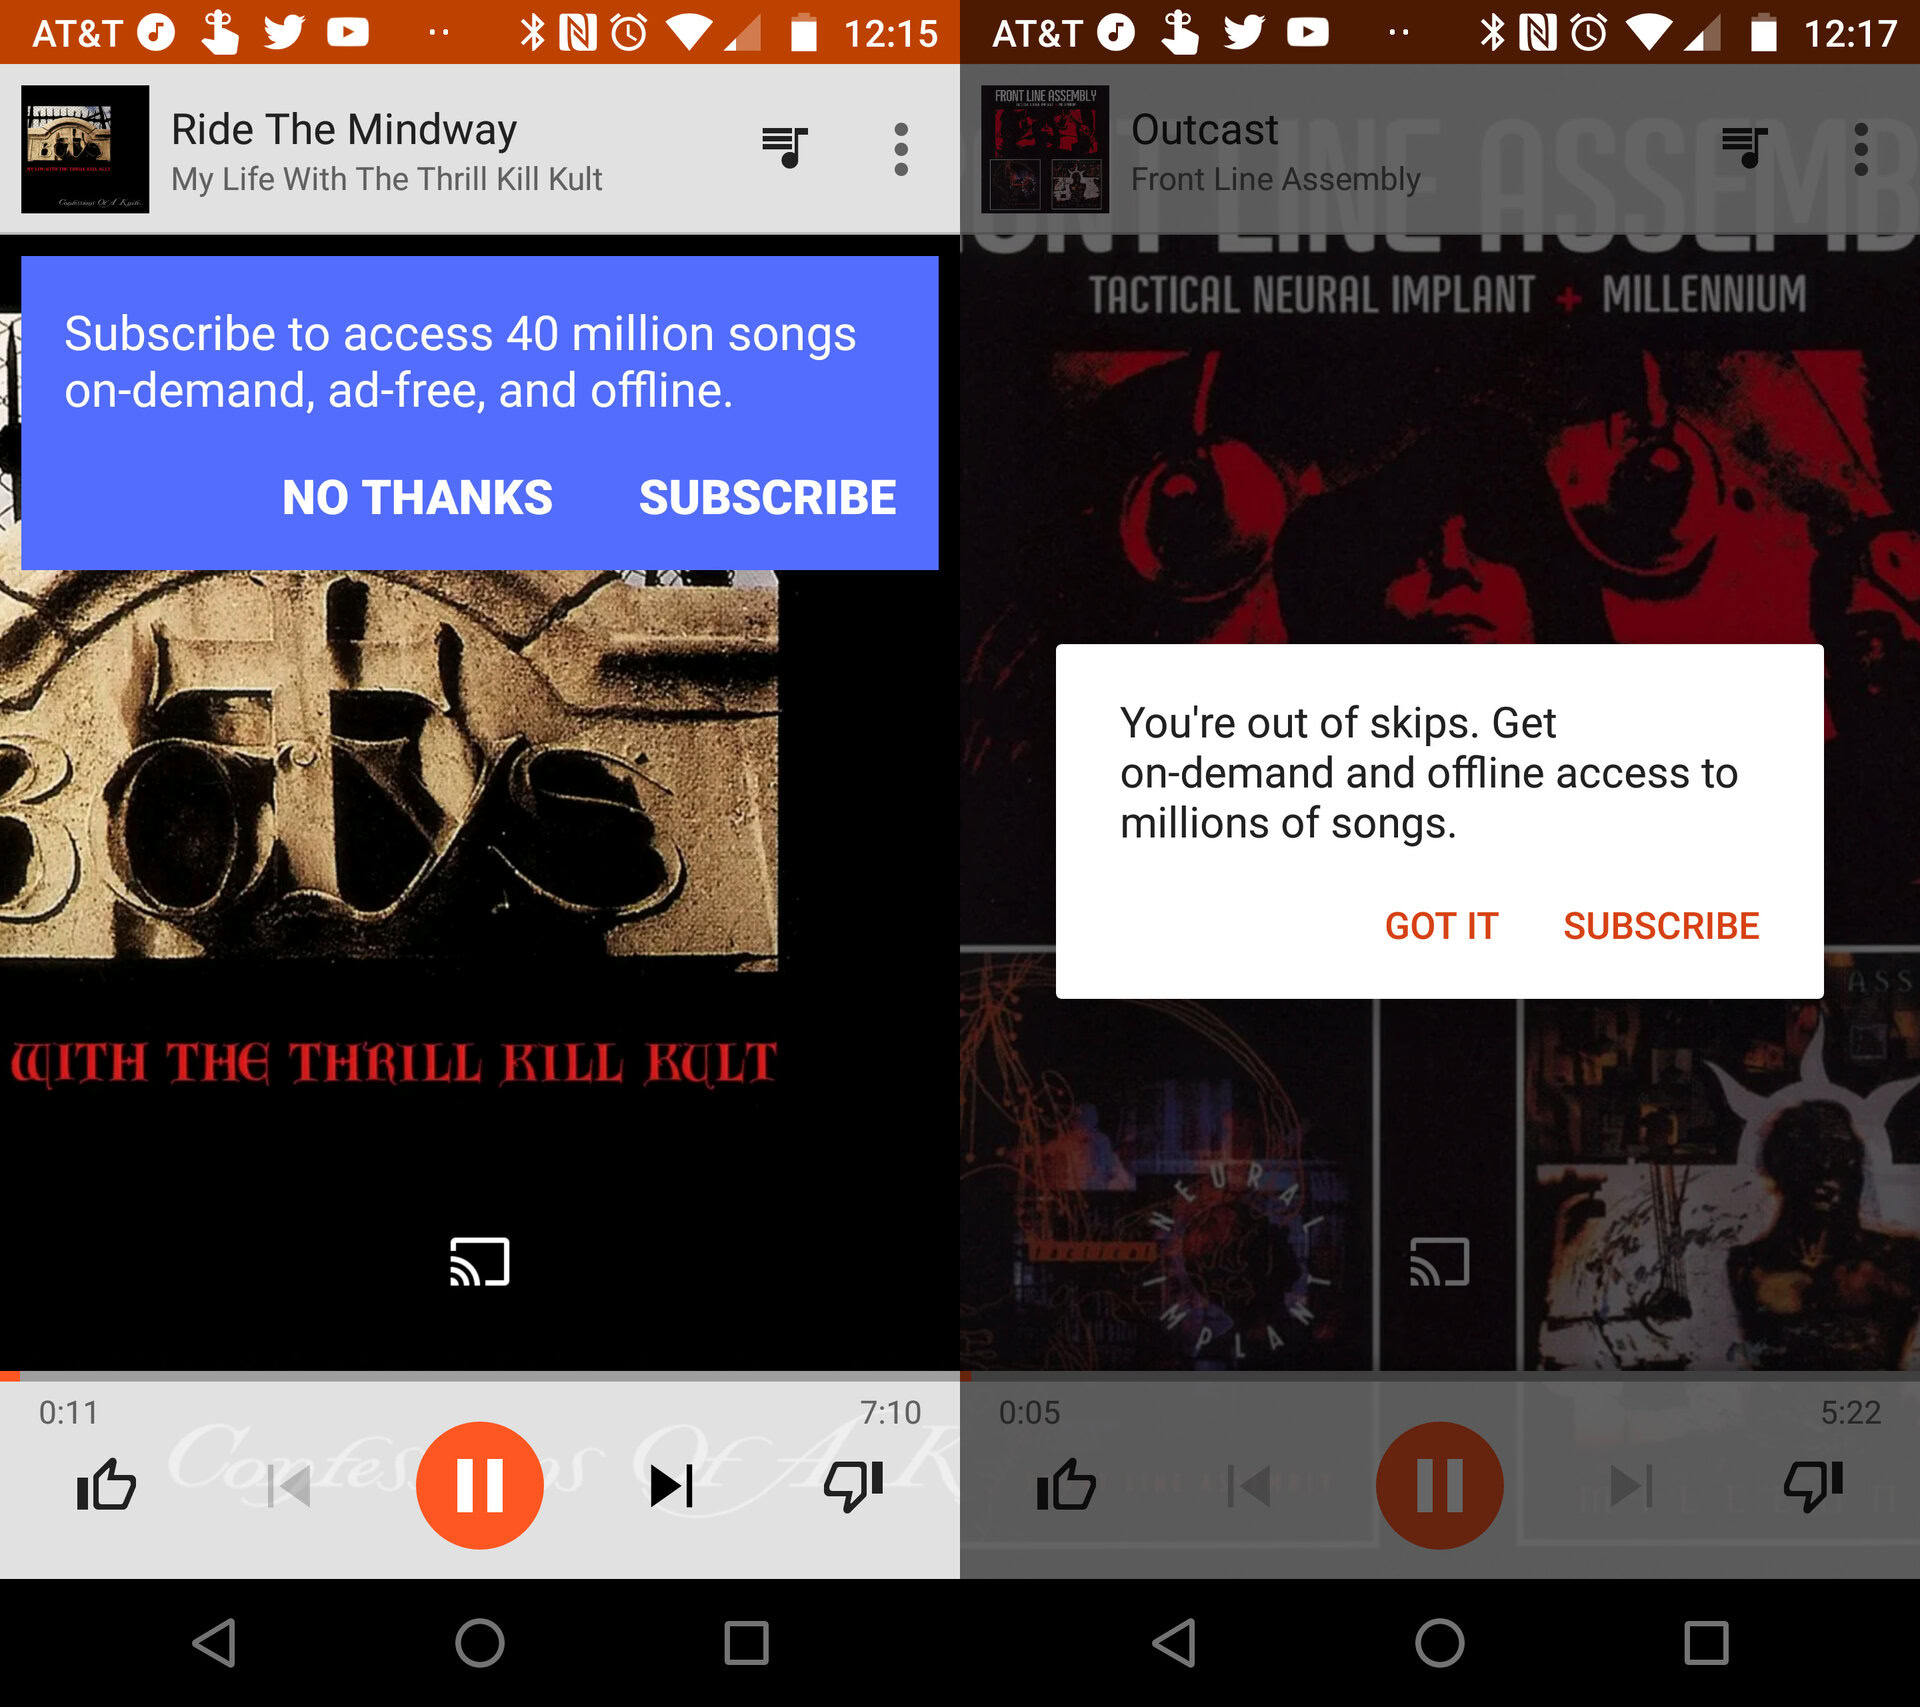 How to use Google Play Music and get more than a streaming service